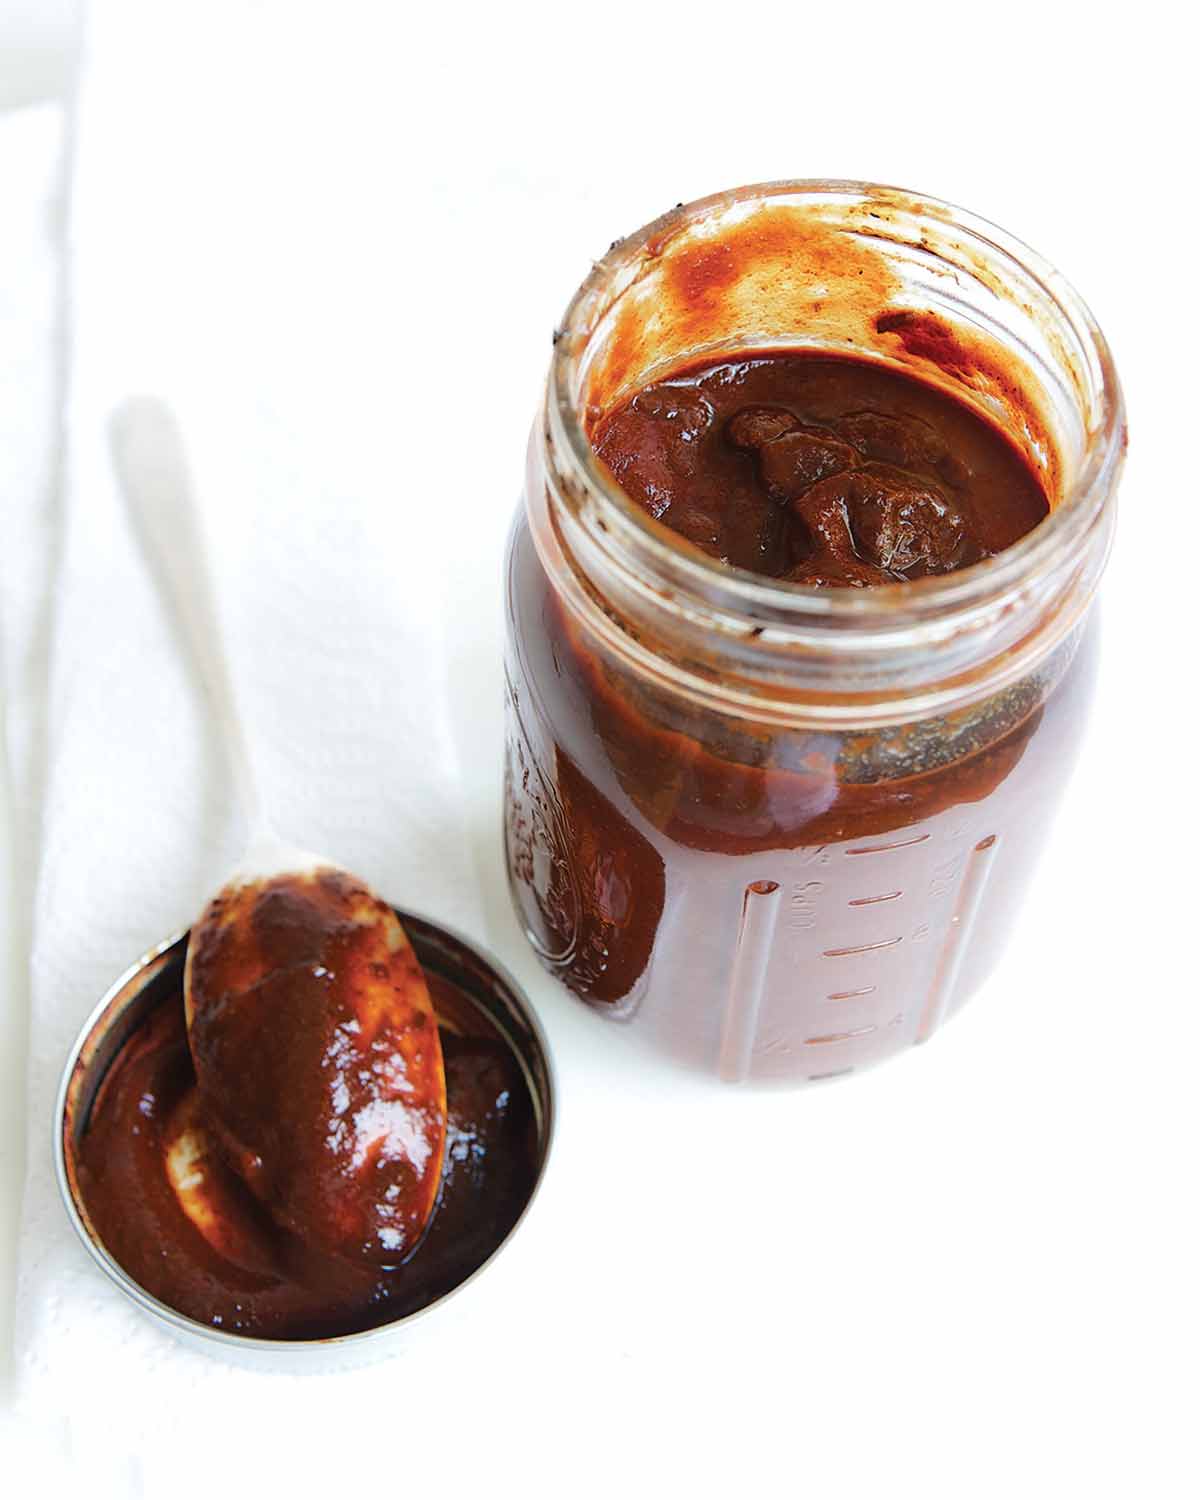 An open Mason jar of adobo sauce with a spoon resting on the lid beside it.